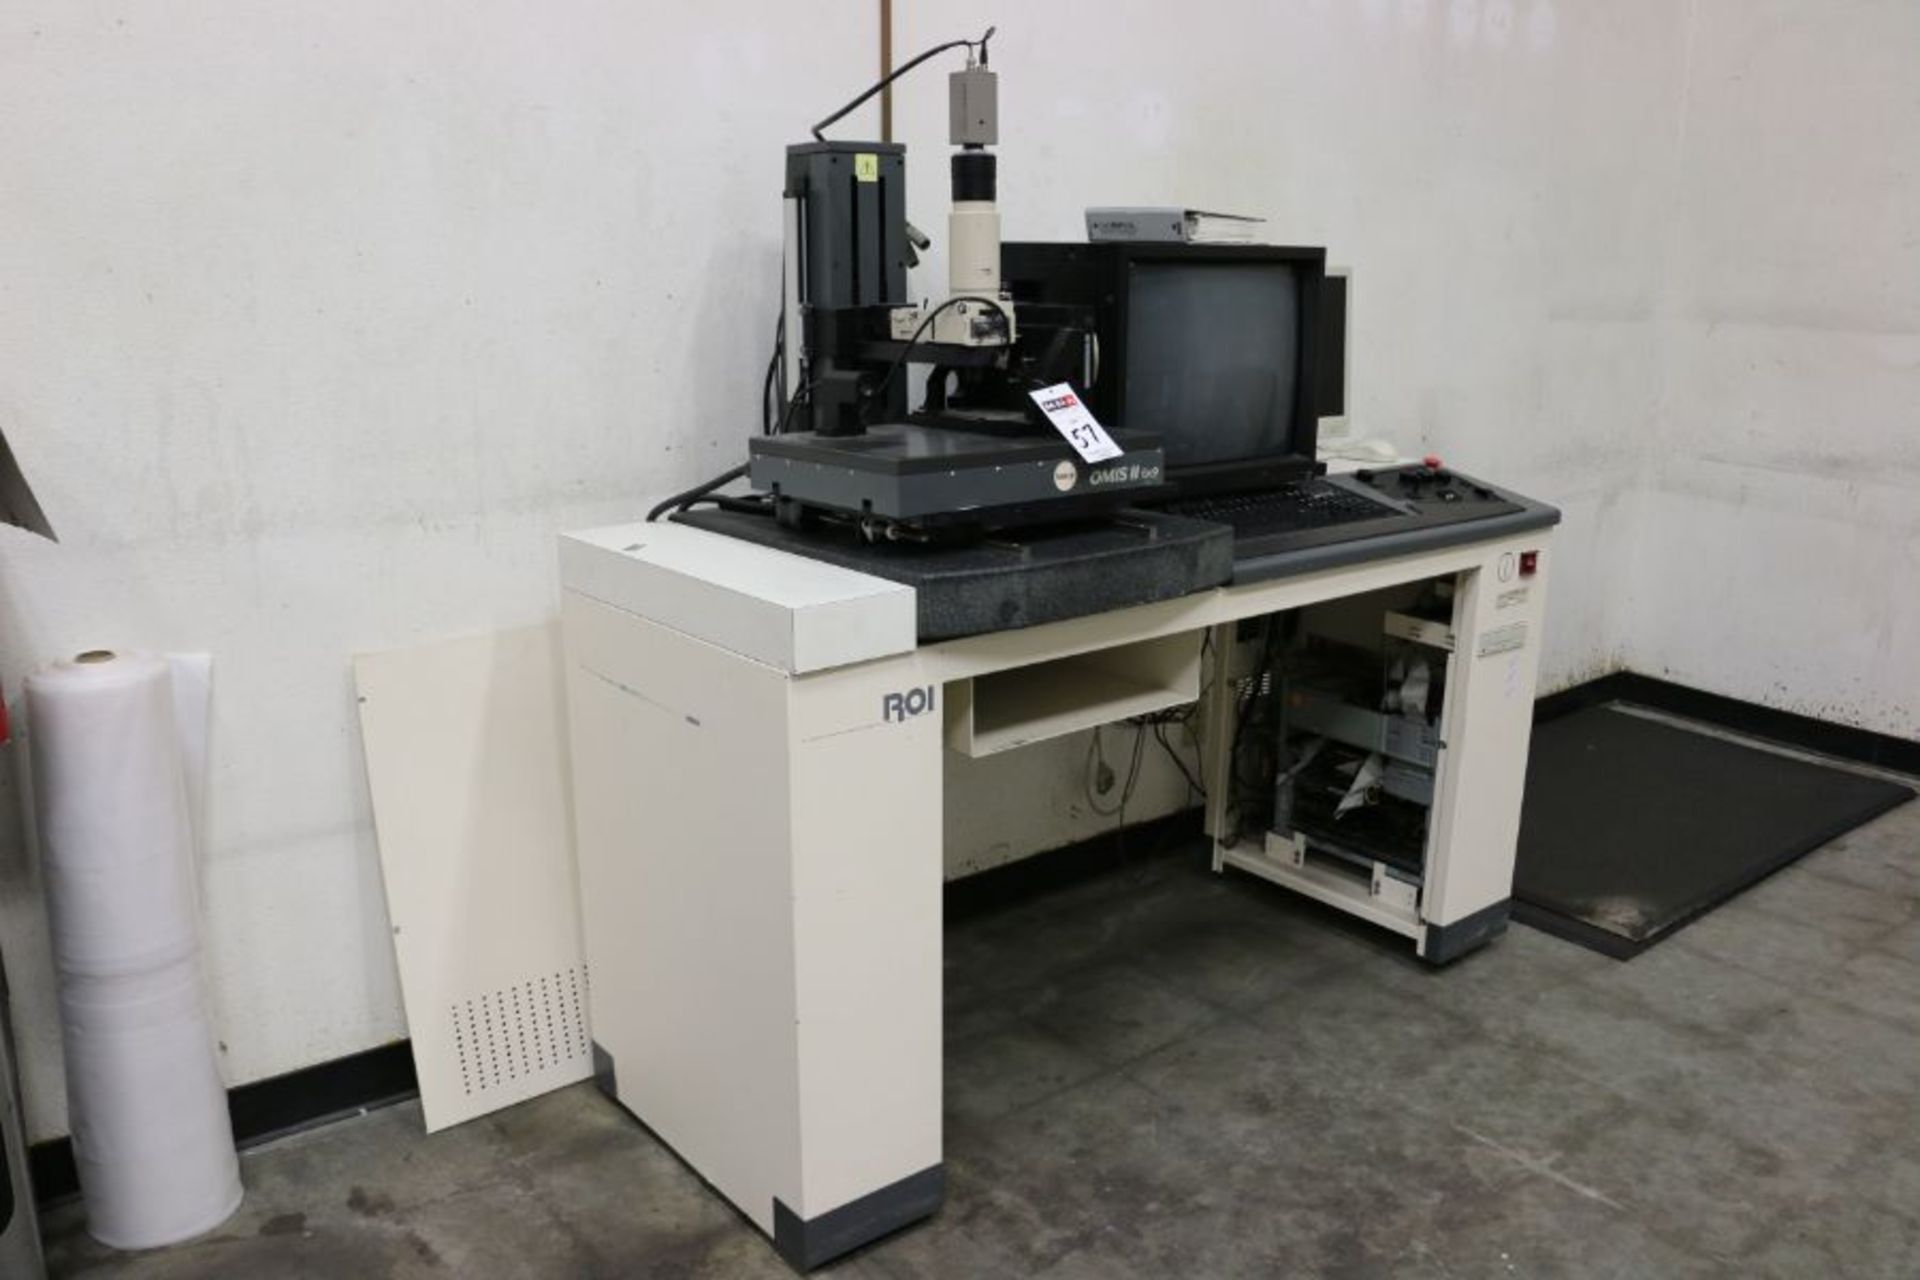 ROI OMIS Optical Inspection Machine, s/n 474786-97-827, New 1997 - Image 3 of 10